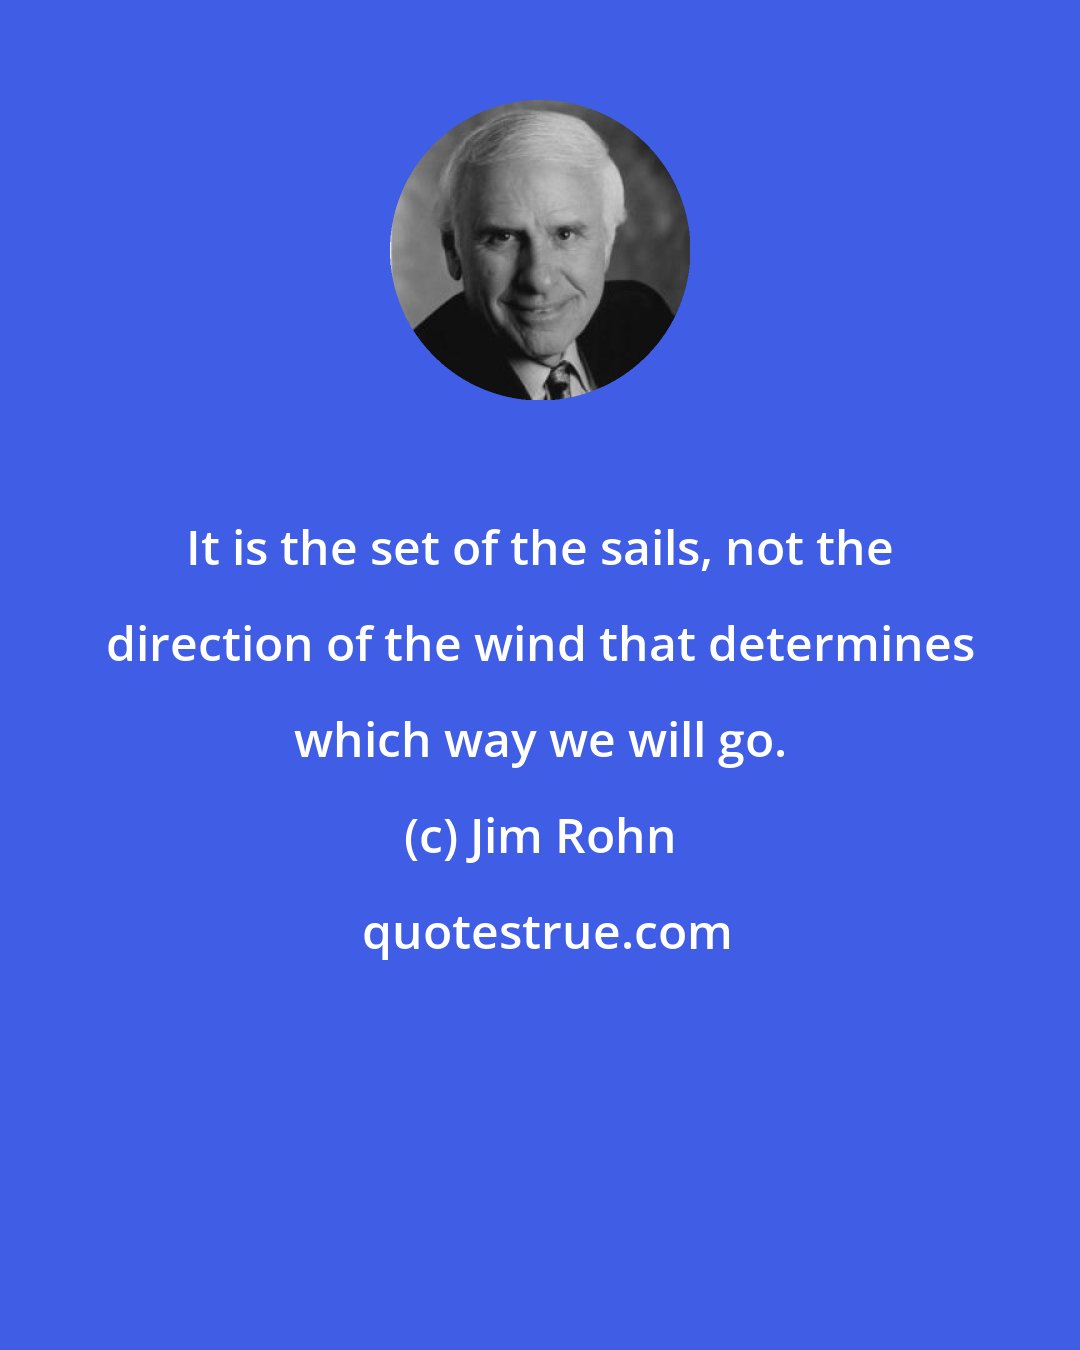 Jim Rohn: It is the set of the sails, not the direction of the wind that determines which way we will go.